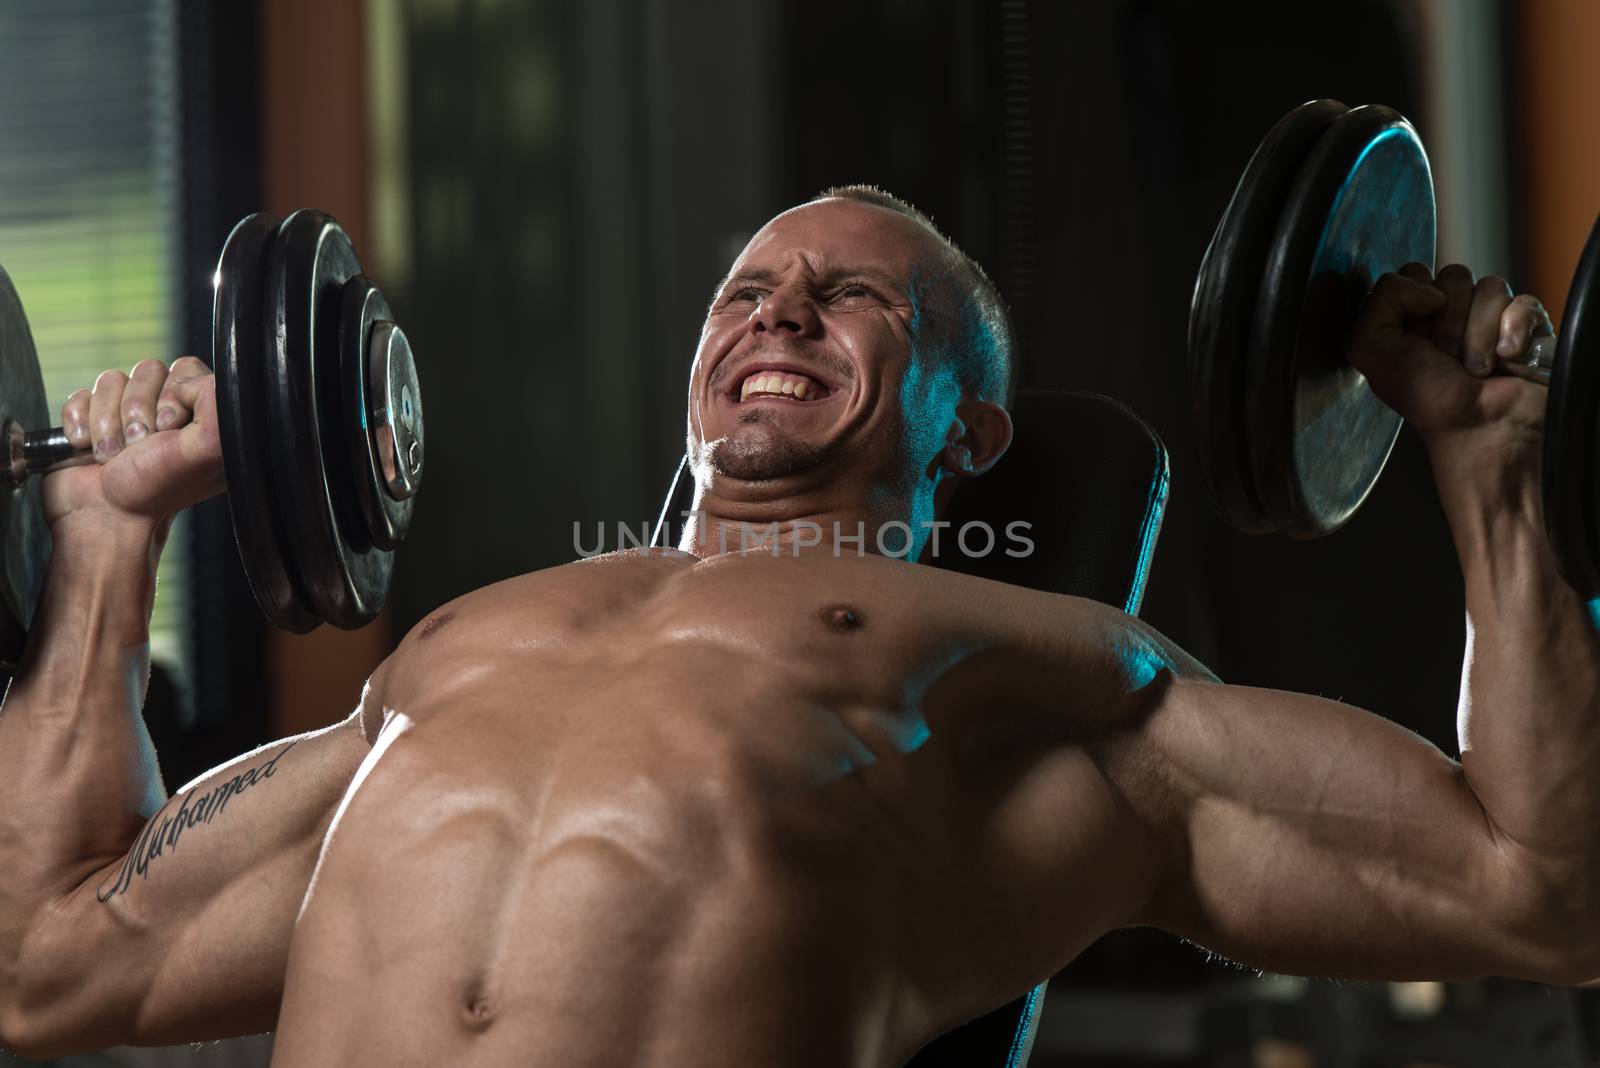 Man Doing Dumbbell Incline Bench Press Workout by JalePhoto